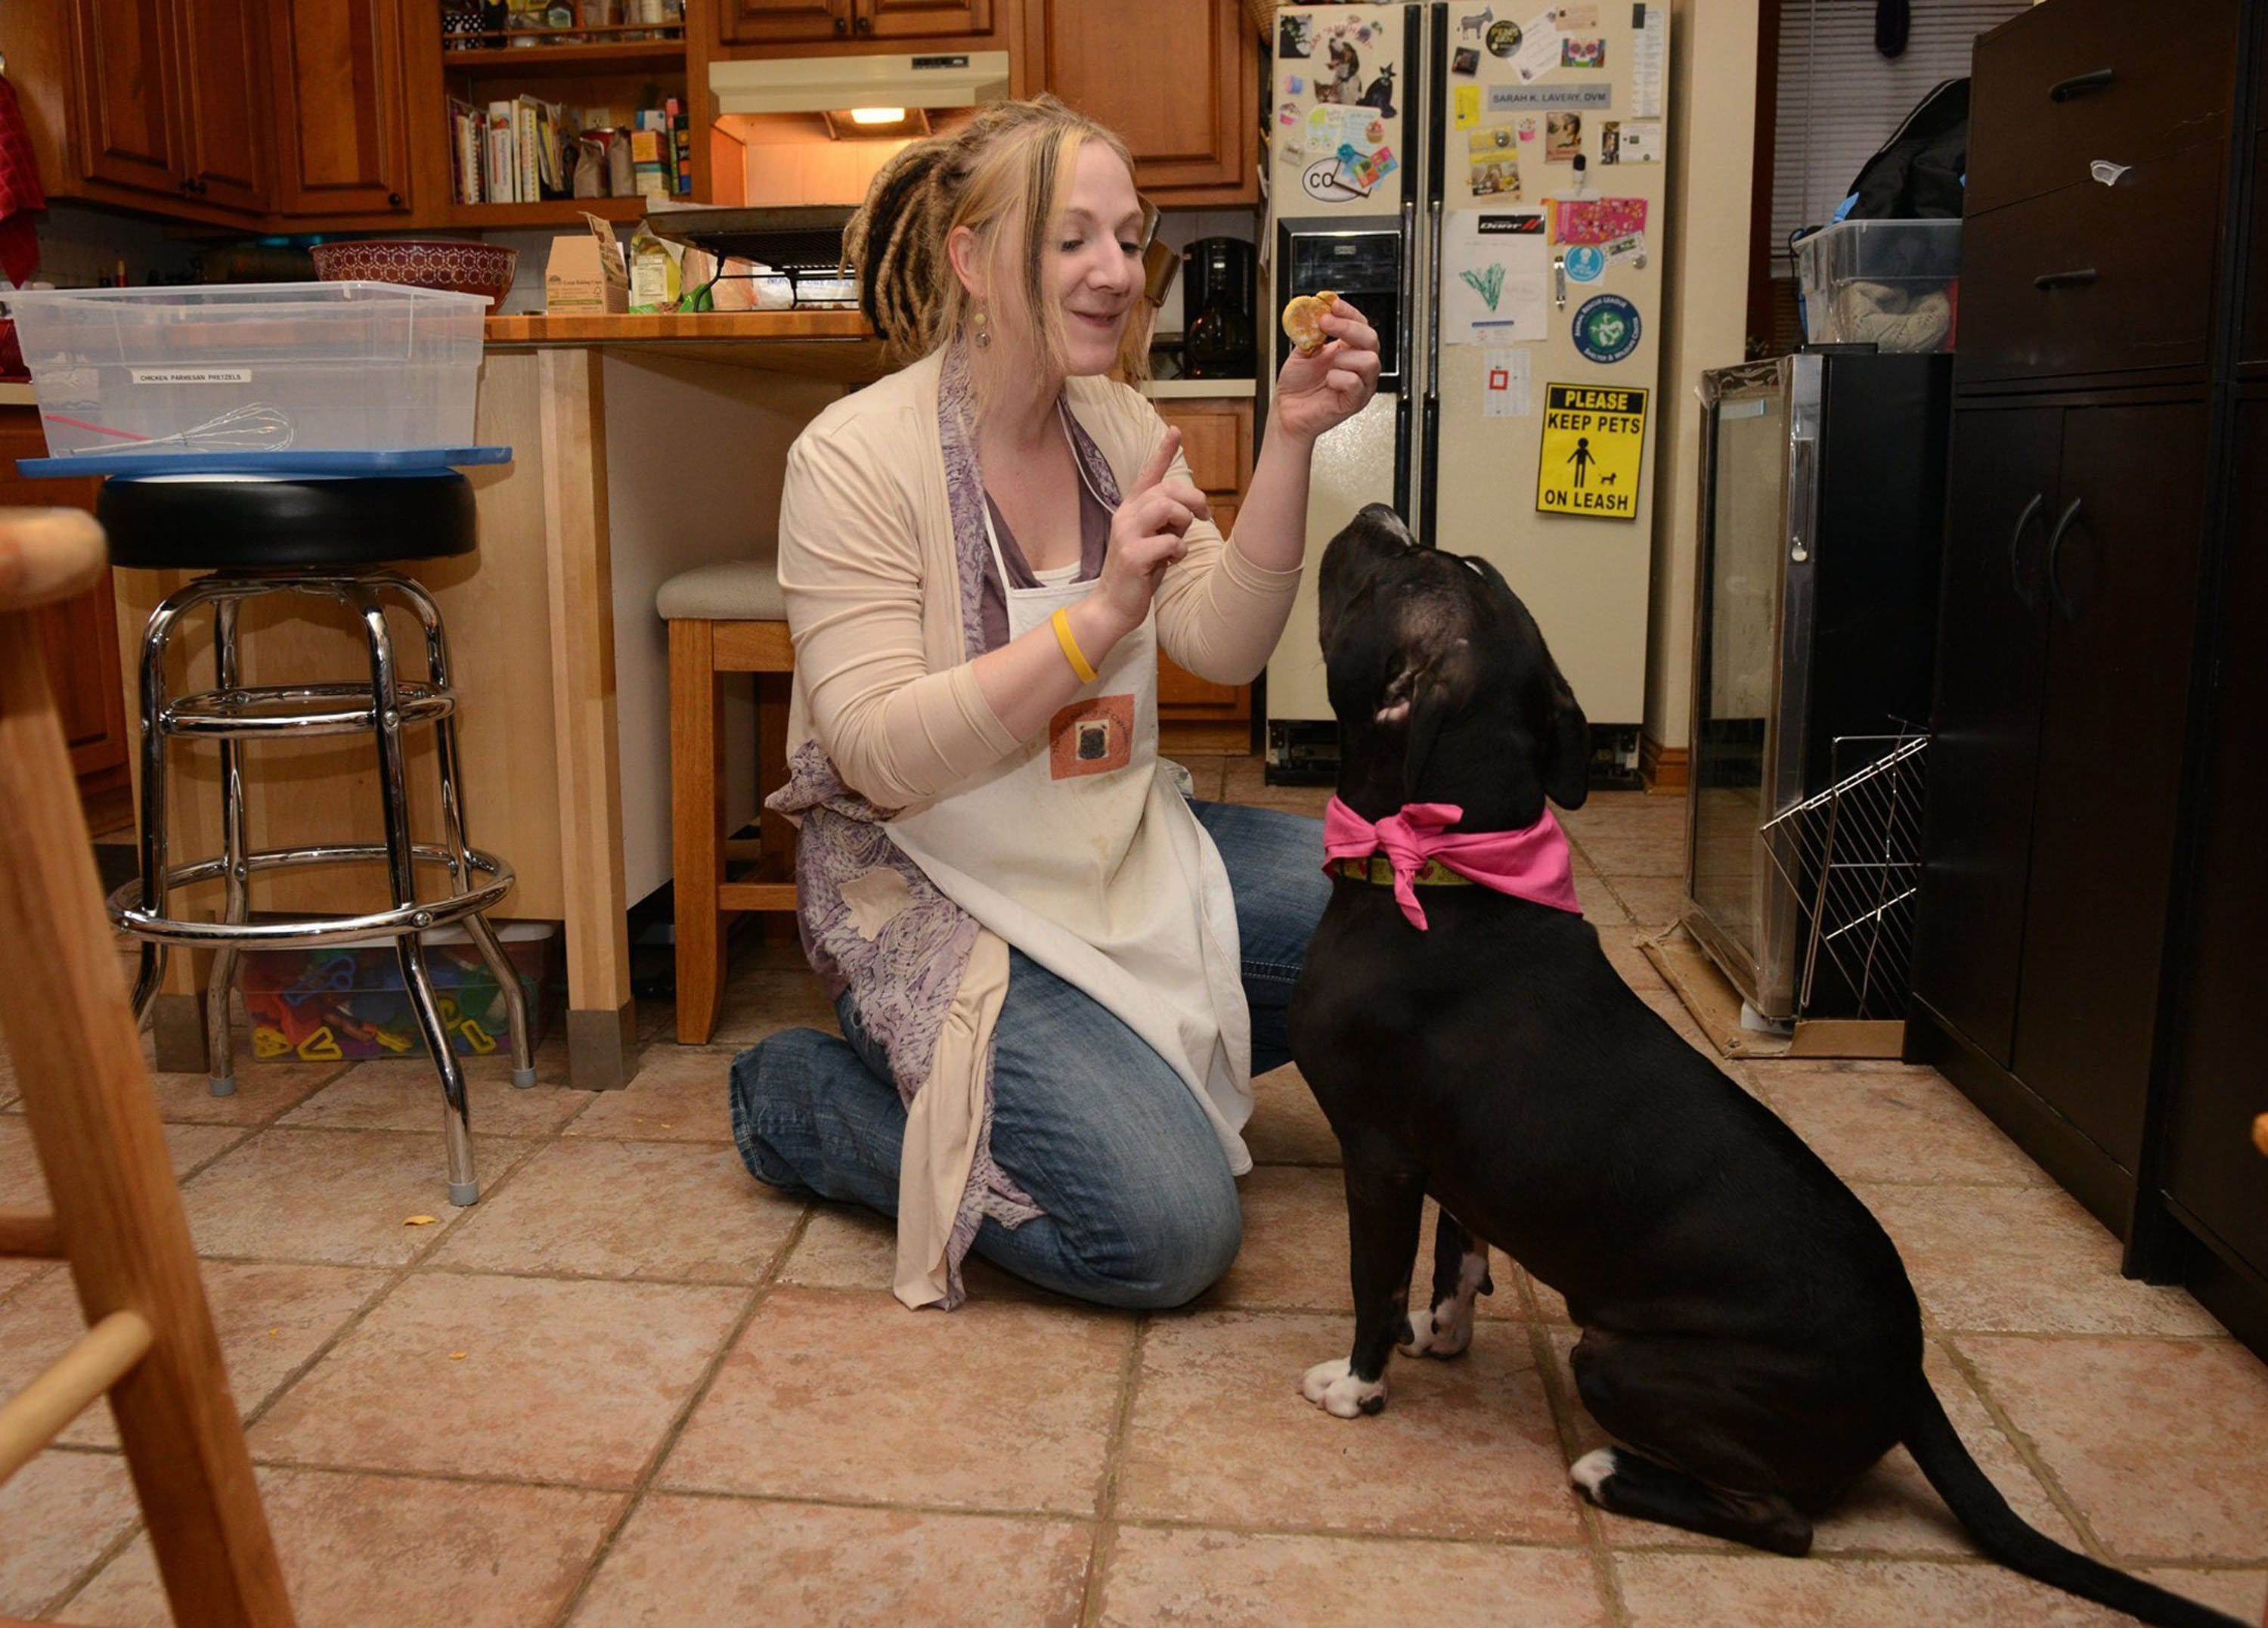 Veterinarian Sara Lavery has her pit bull, Arya, wait for one of her homemade treats in her Oakmont, Pa., kitchen.